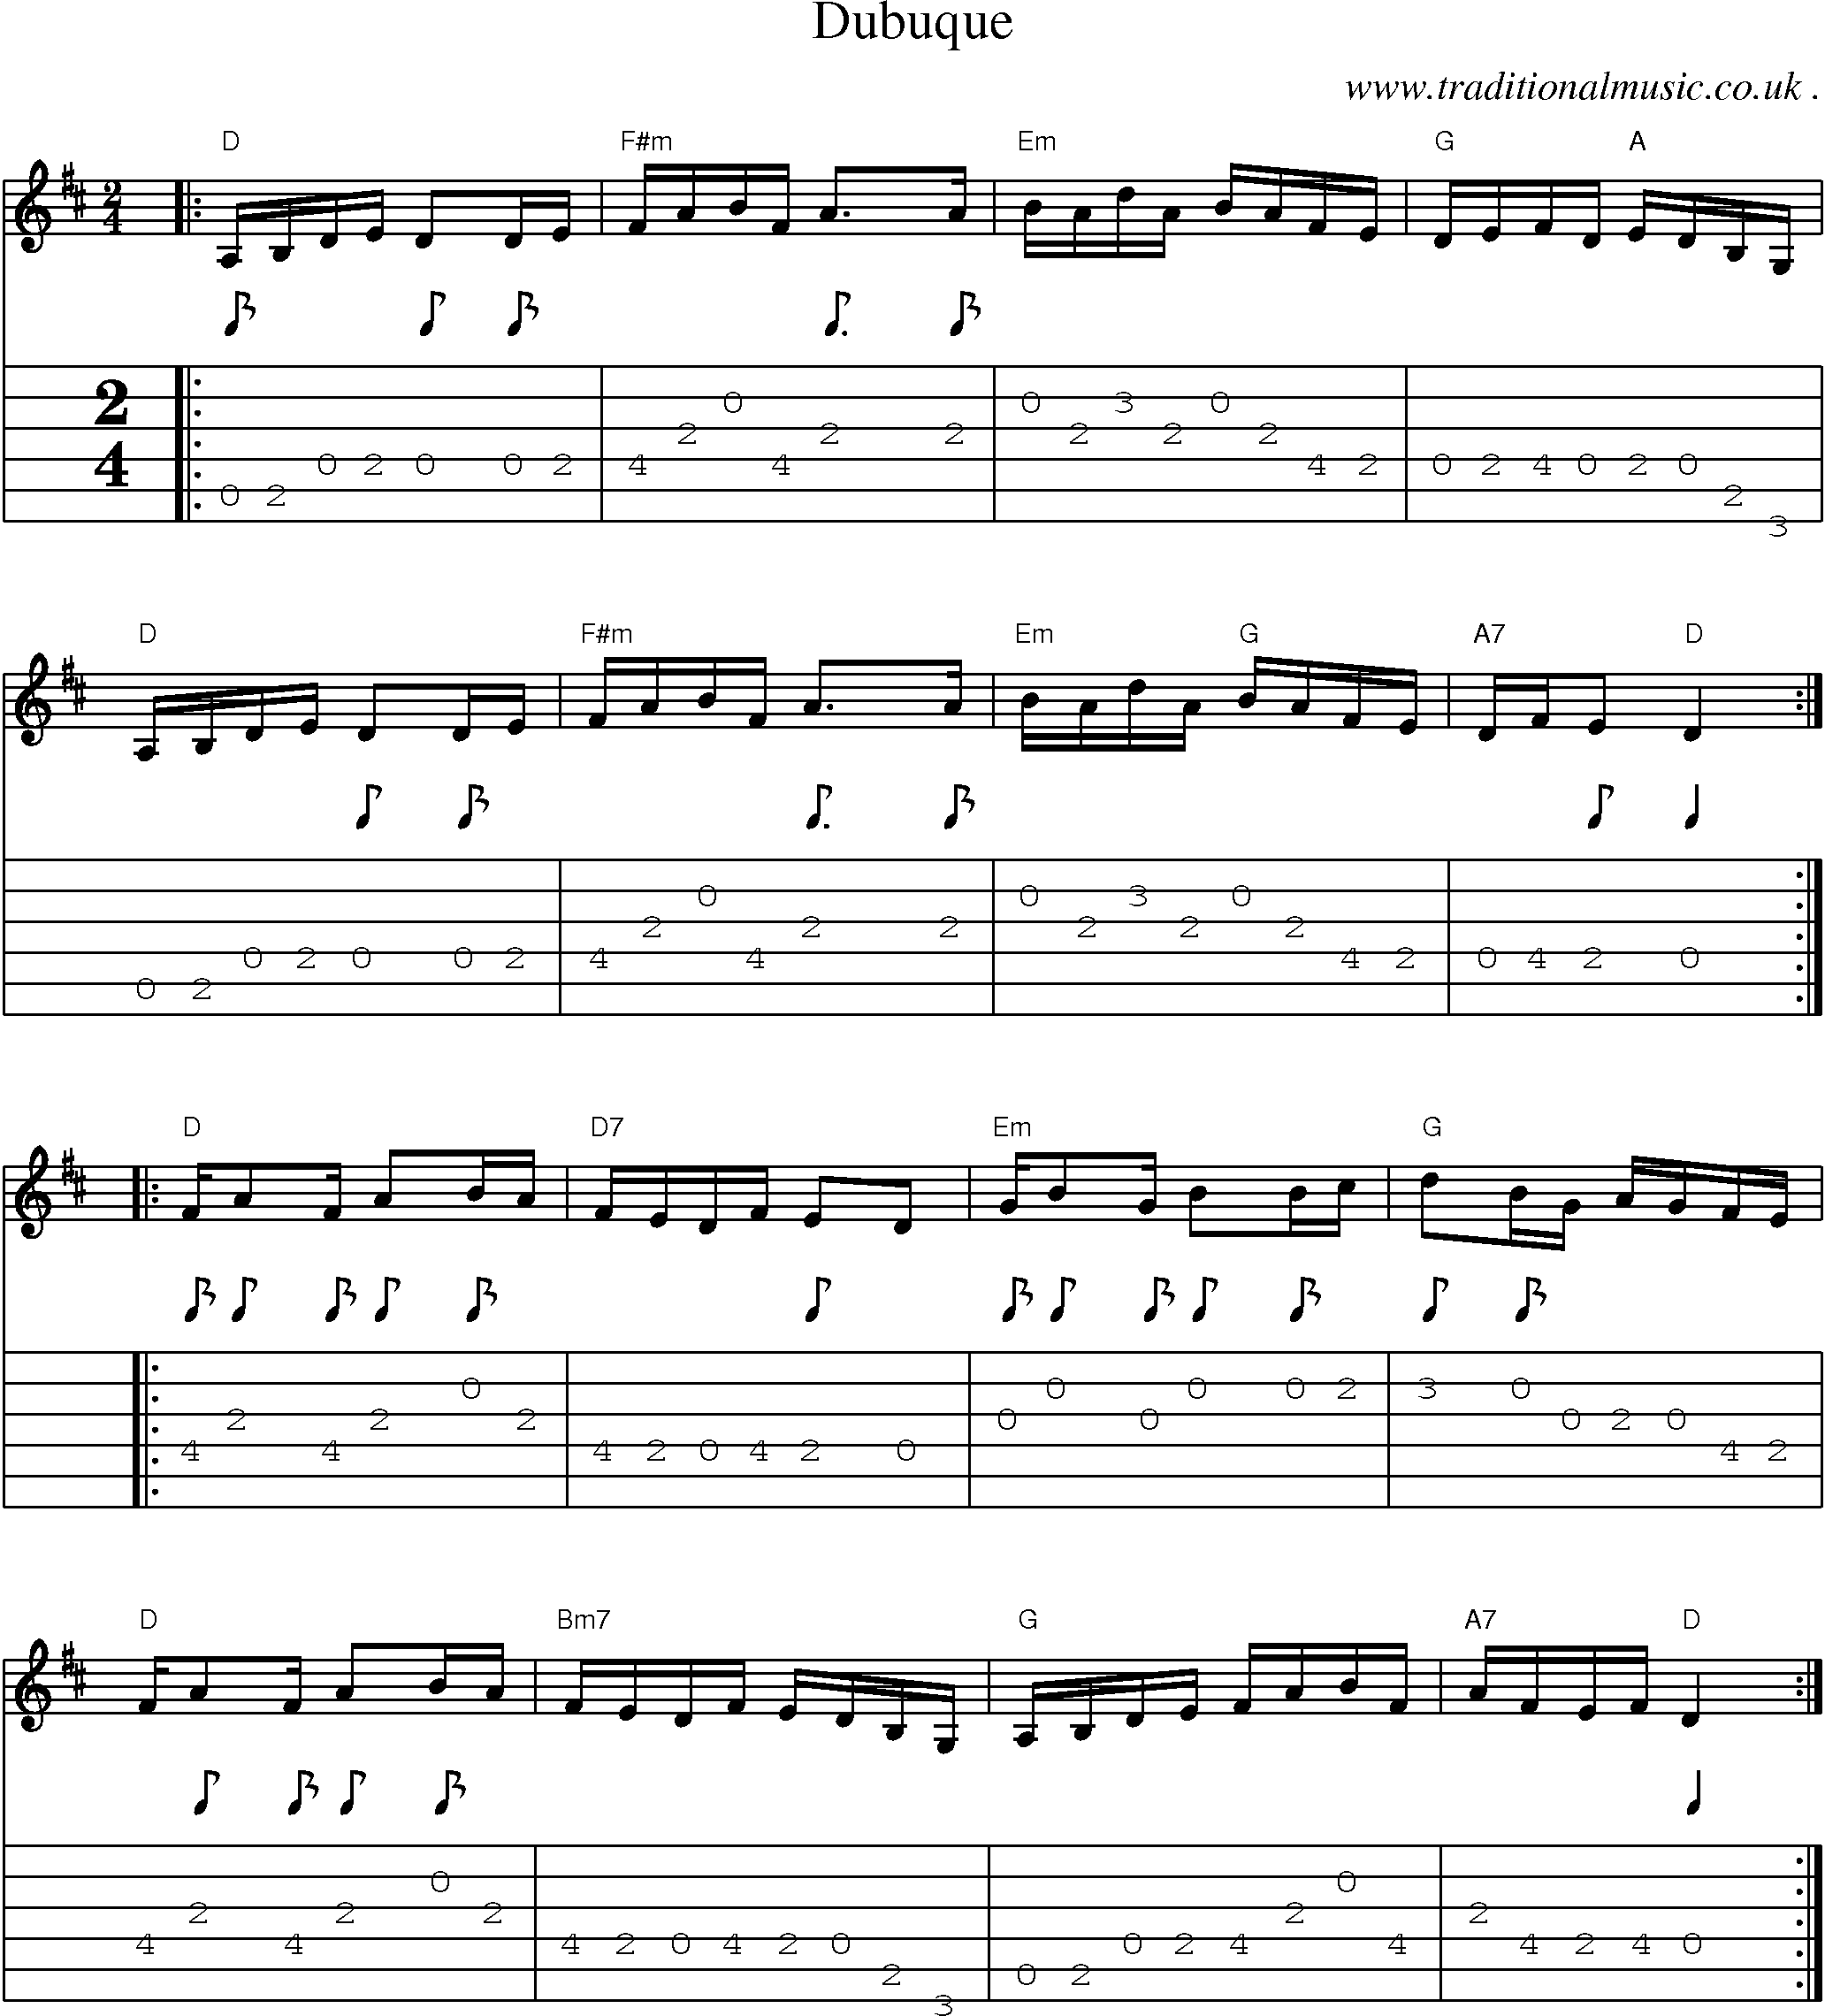 Music Score and Guitar Tabs for Dubuque